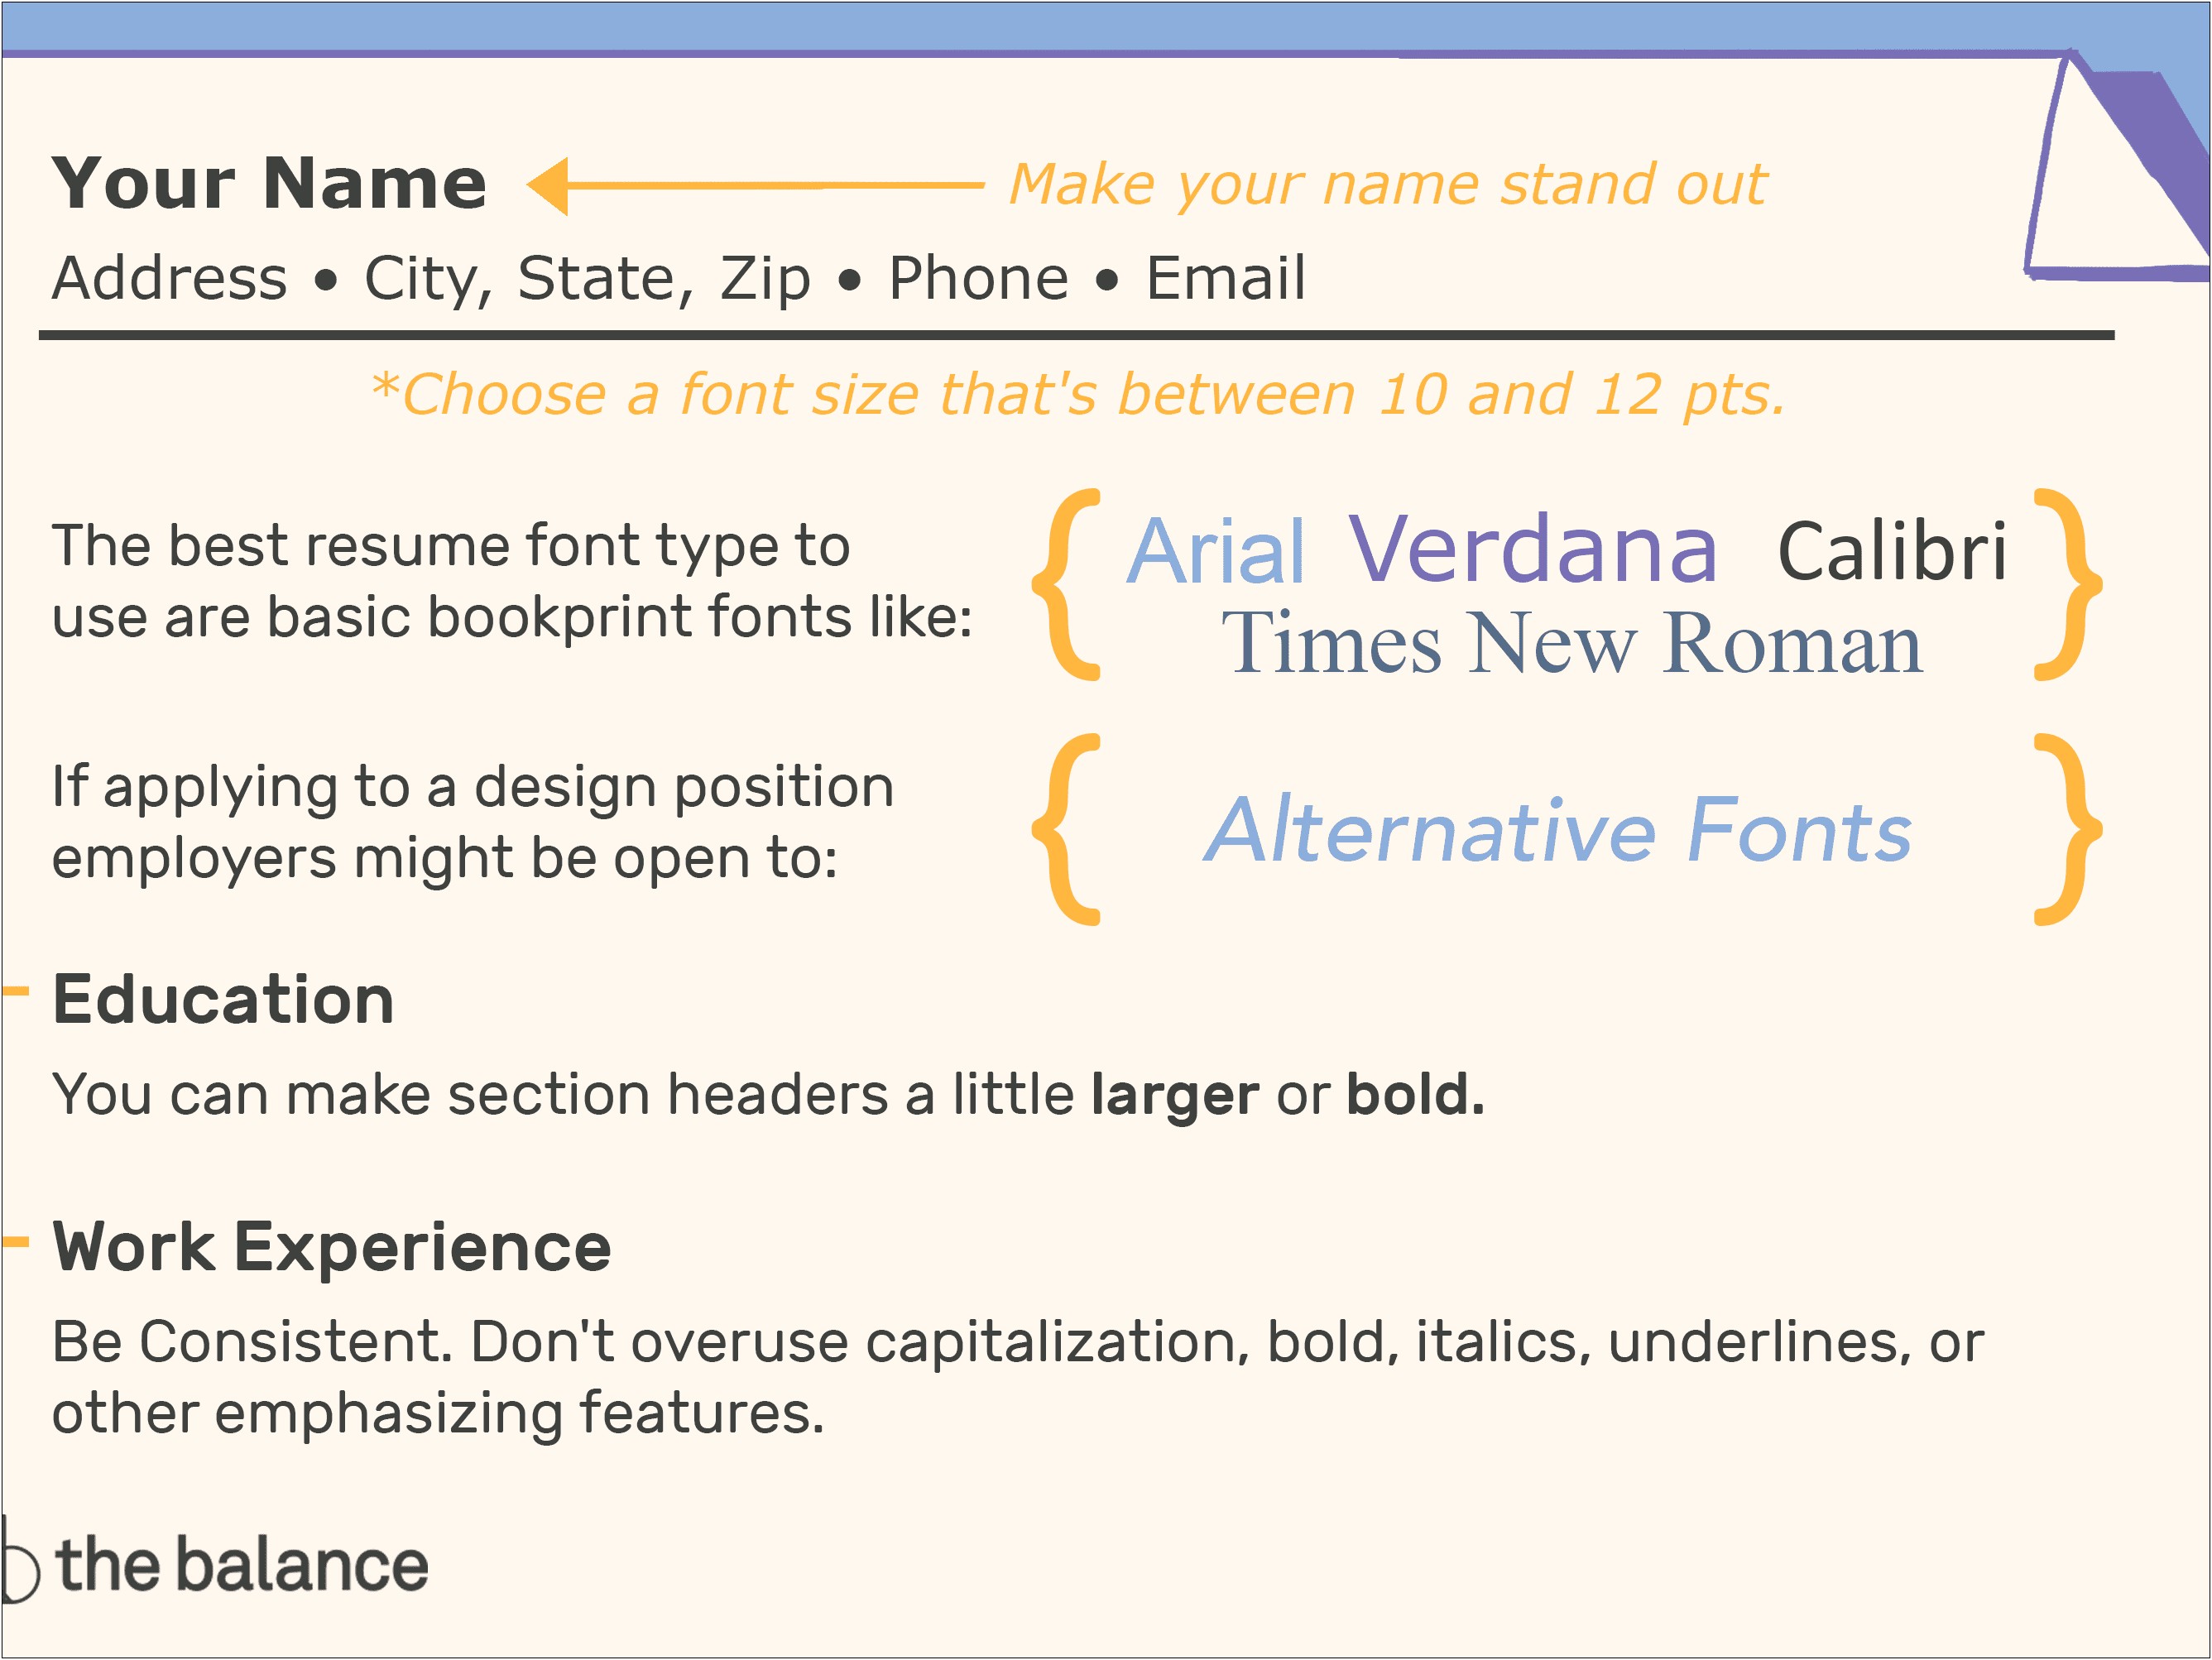 The Best Resume Fonts For Titles